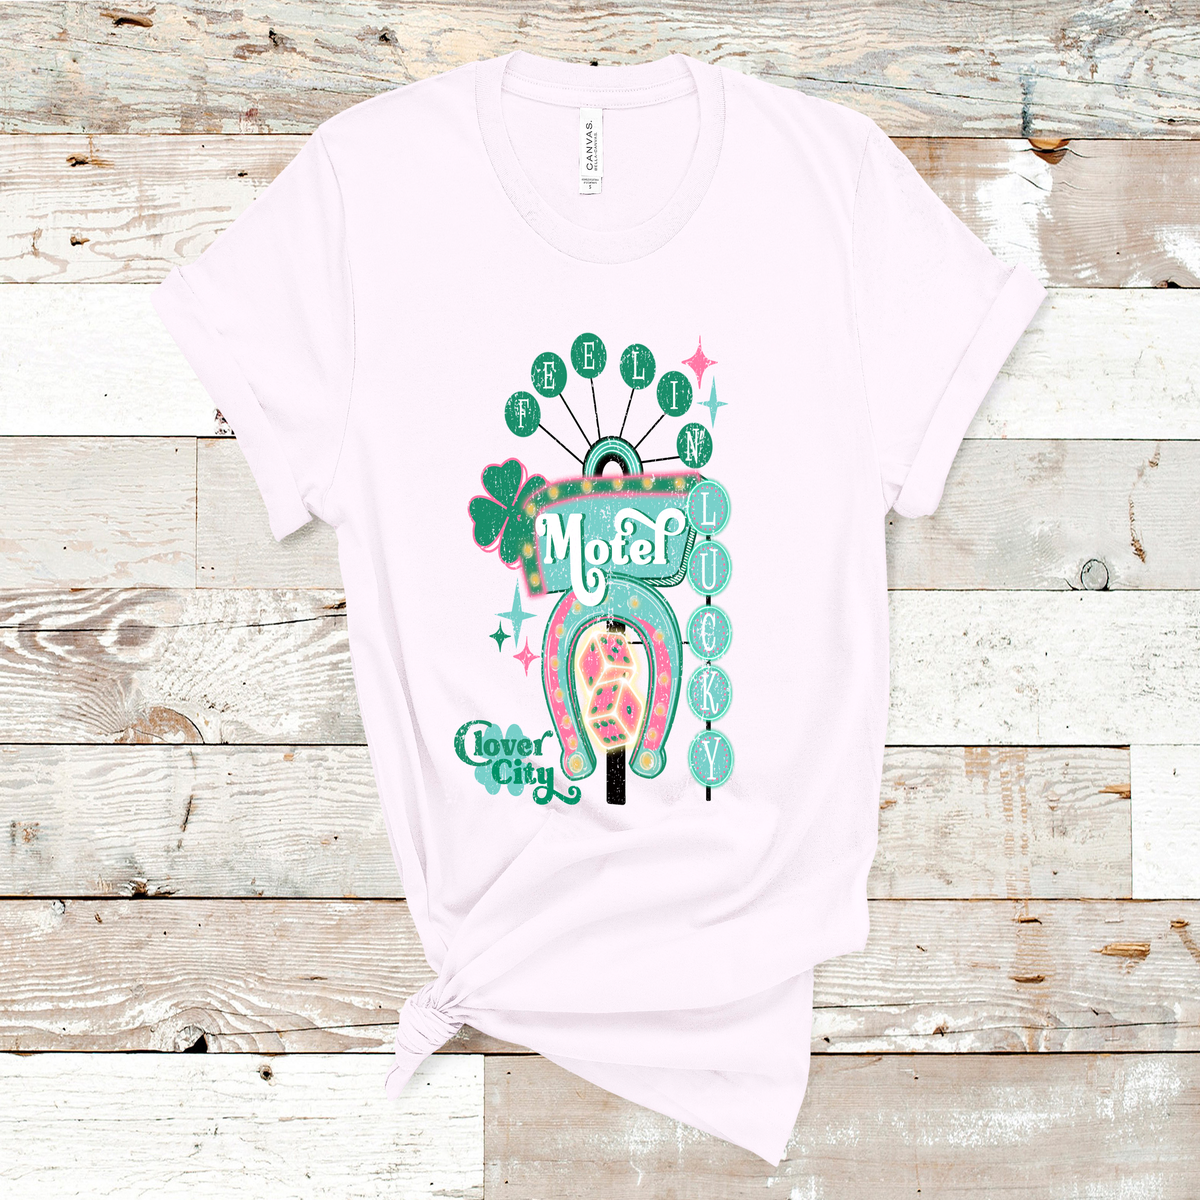 Soft Pink Tee. Graphic of a vintage Neon Sign The word feeling with each letter in green circles at the top with the word lucky down the side with each letter in a turquoise circle. There is a sign in the center with the word motel in it, underneath there is a horse shoe with dice inside at he bottom of the sign. There is also a four leaf clover with the word clover city over it in green.